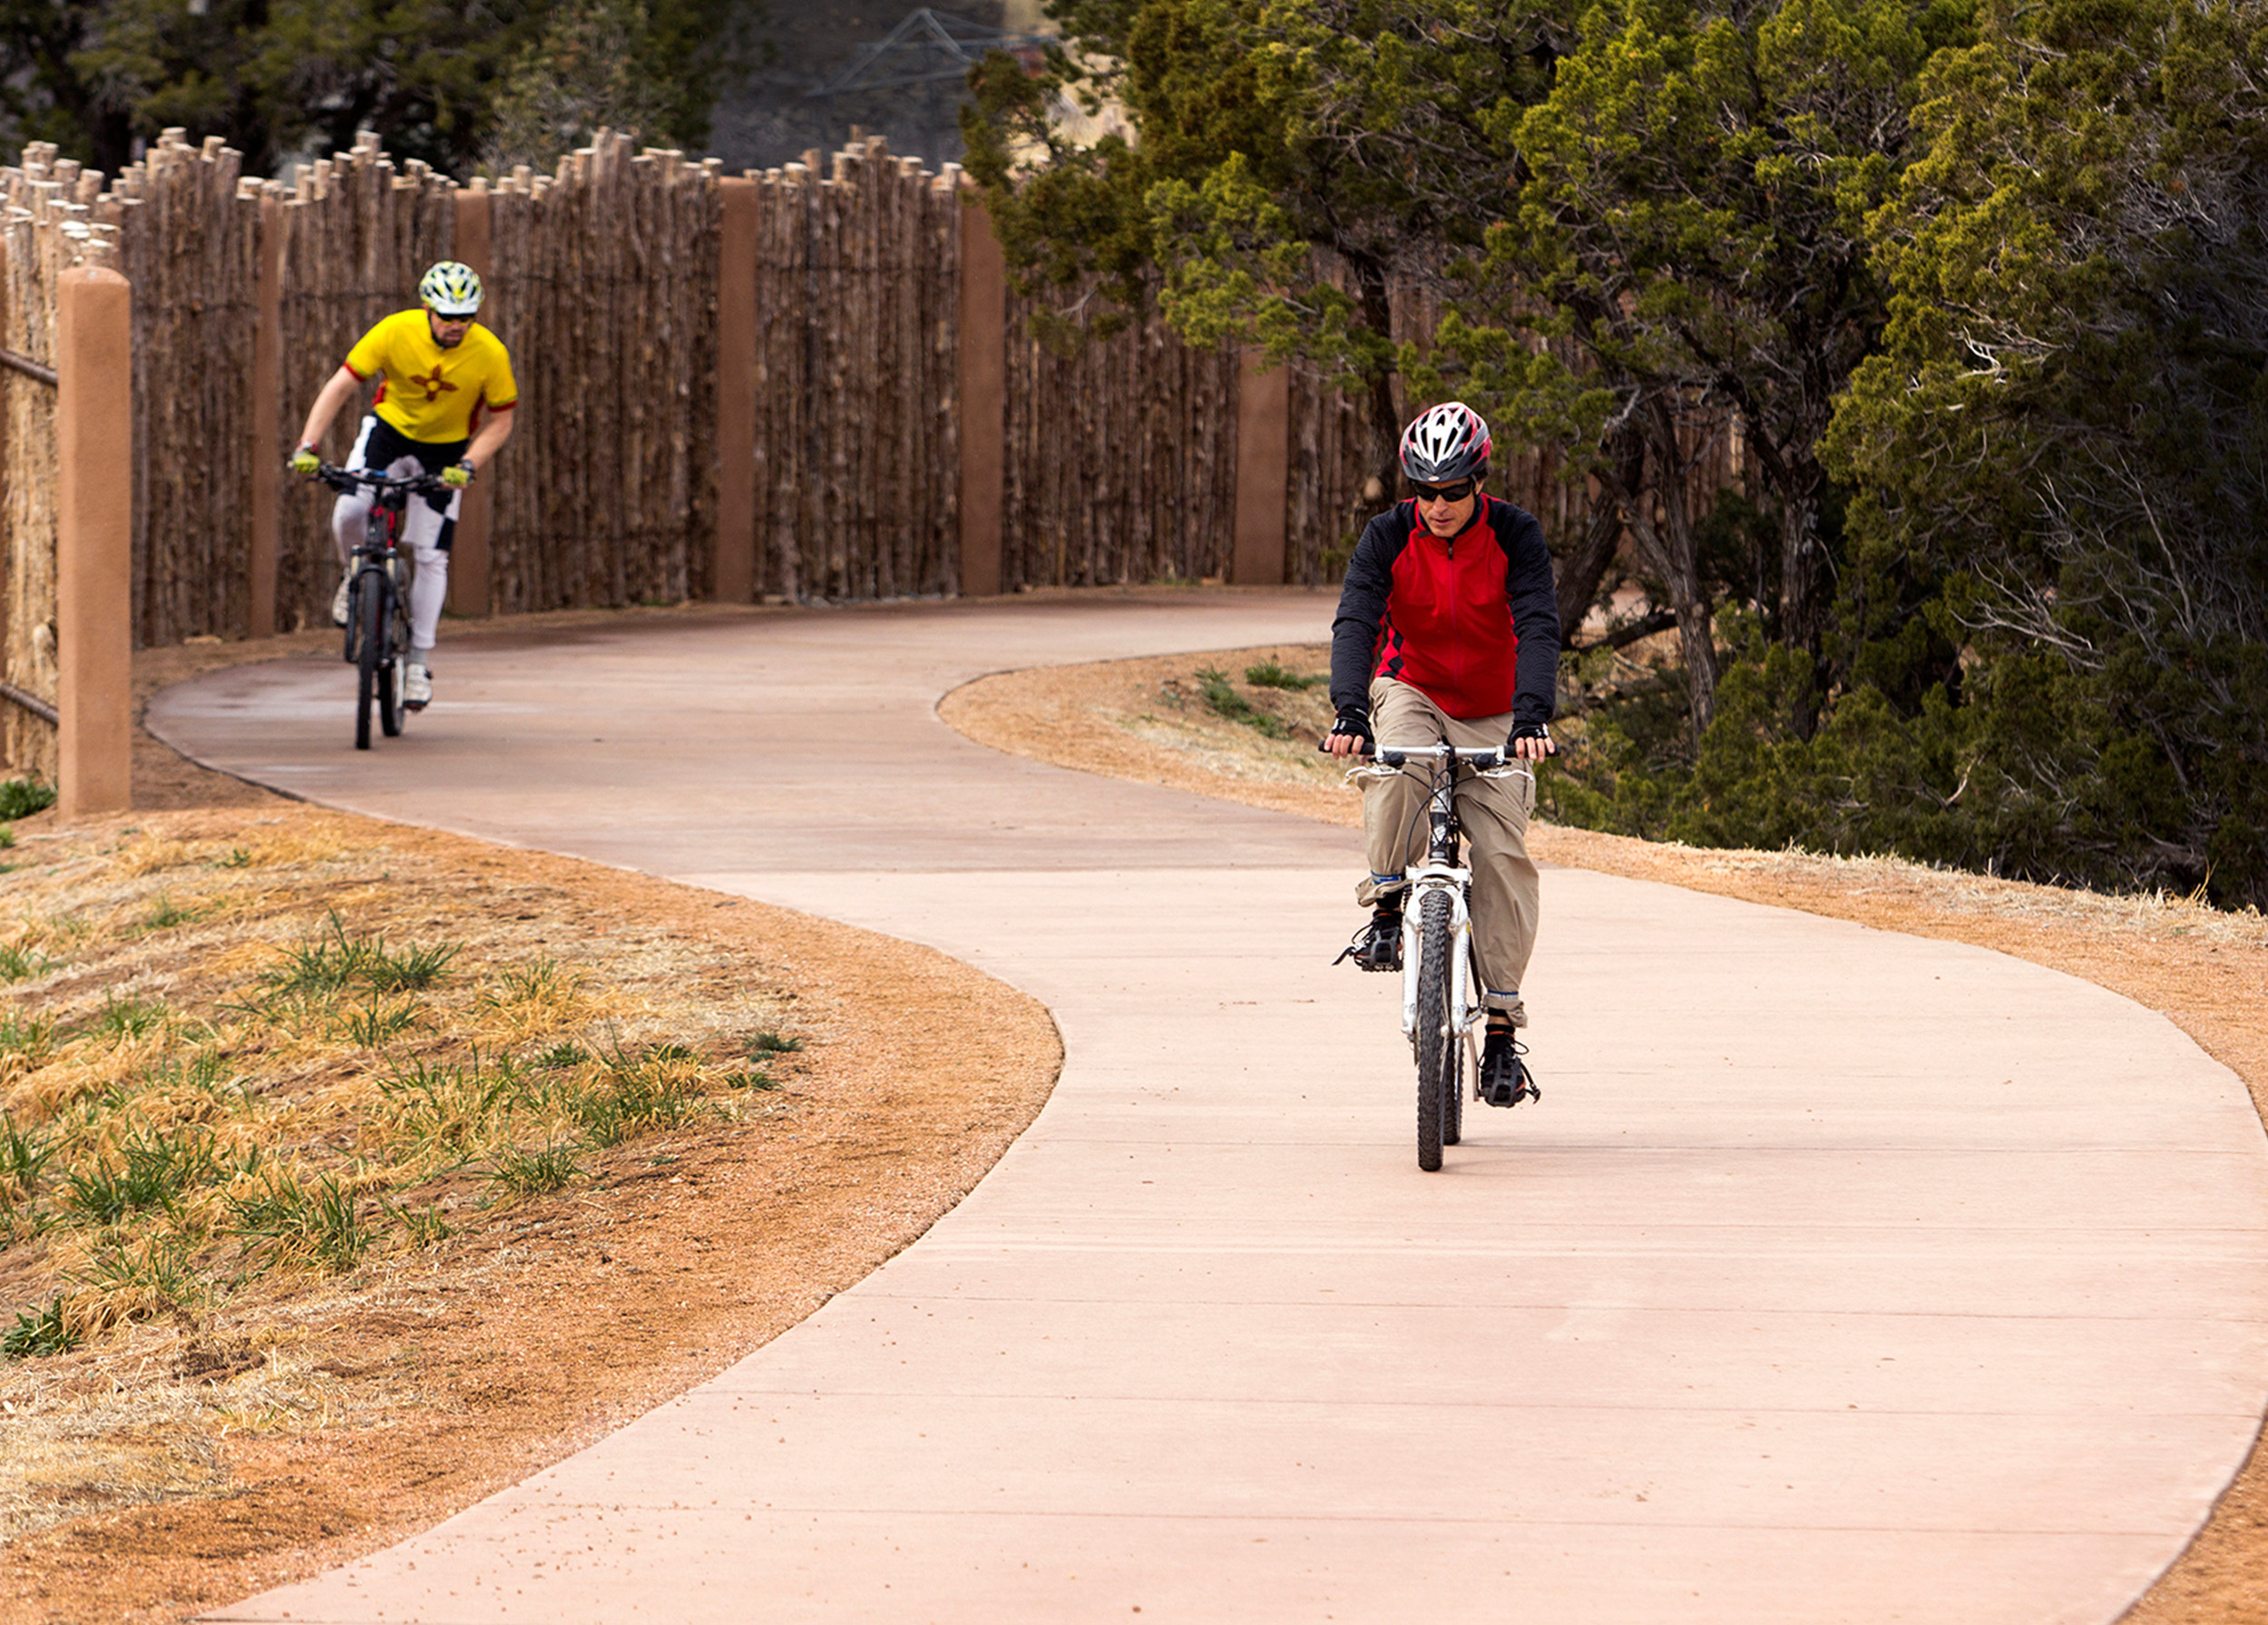 The plan to improve the area included trailheads, perimeter fencing, trail building and closures, regional trail connection improvements, and a comprehensive signage and wayfinding system.